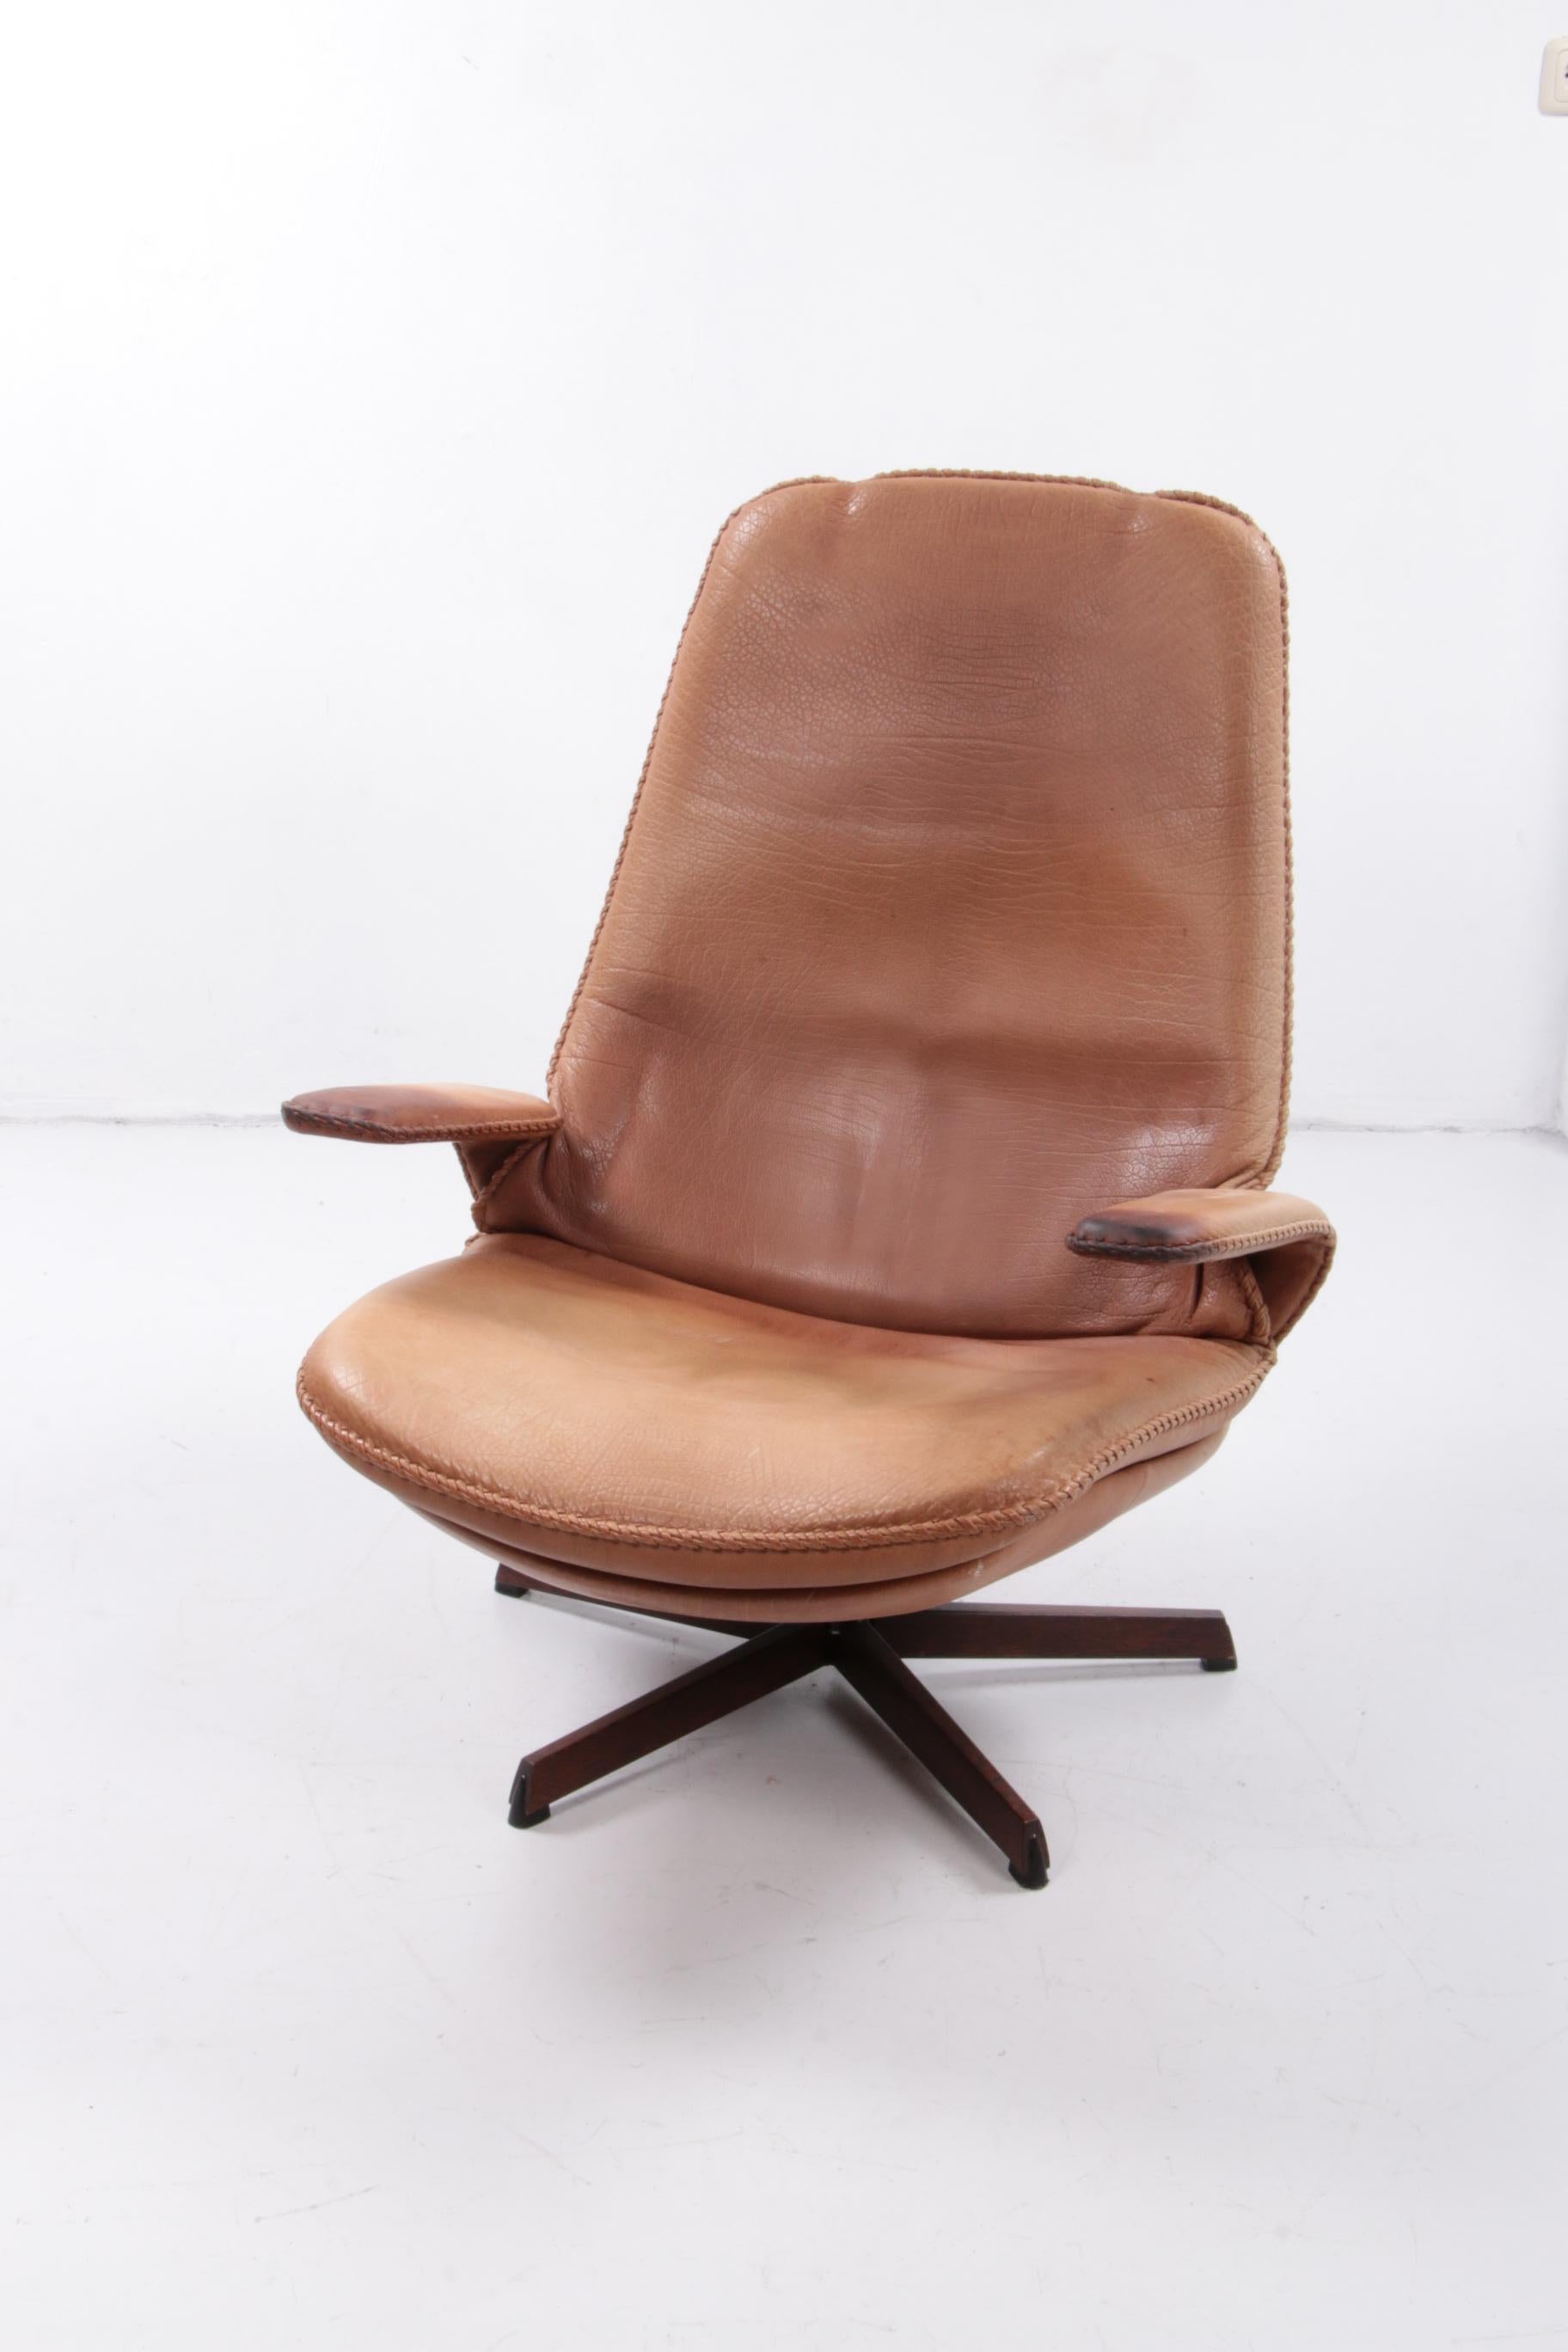 Danish Buffalo Leather Adjustable Armchair & Ottoman Set by M&S Mobler, 1960s In Good Condition For Sale In Oostrum-Venray, NL